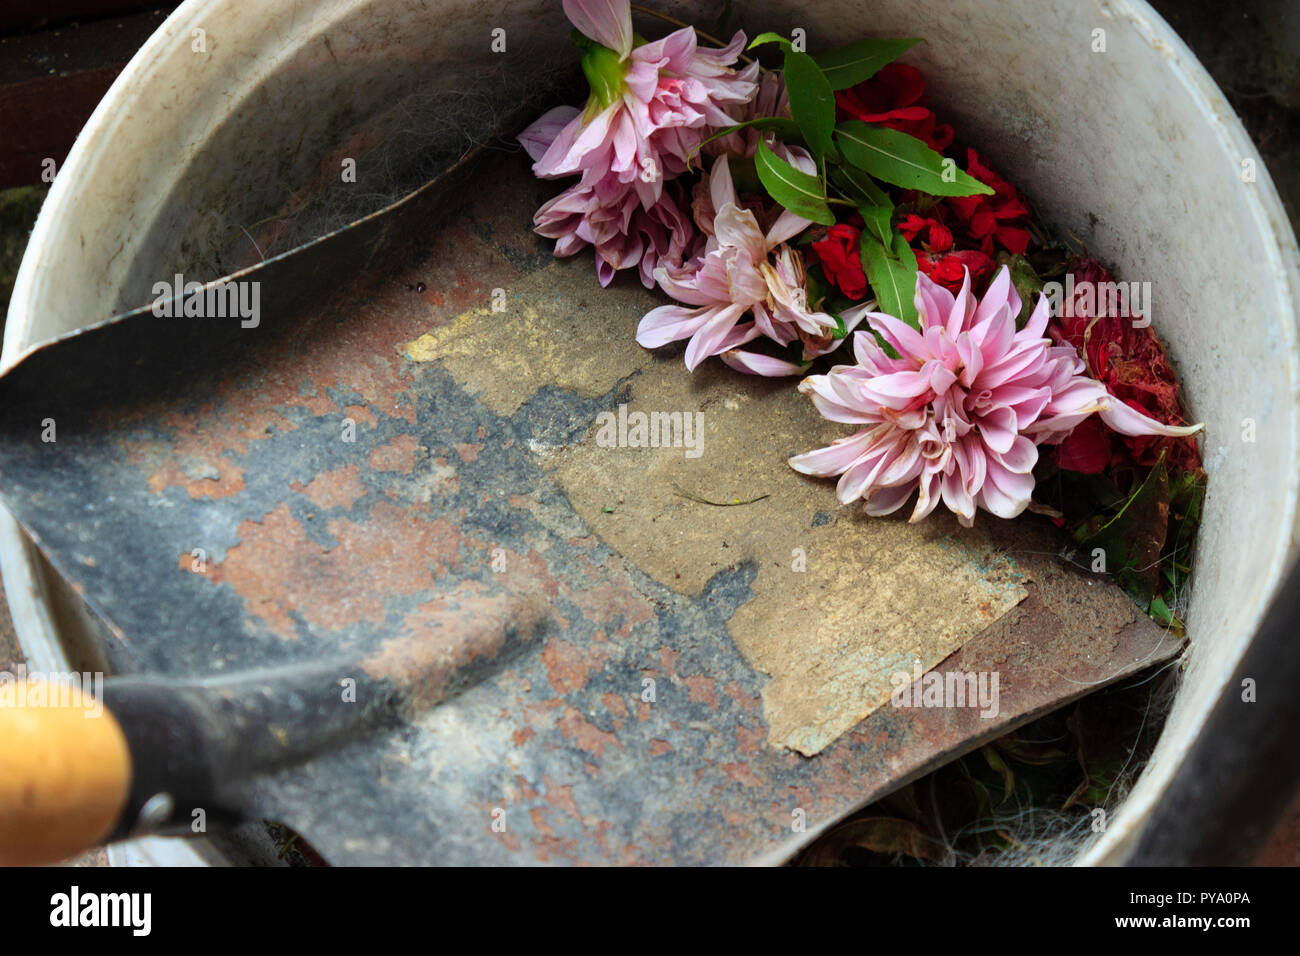 Wooden handled garden spade in white bucket with dead headed pink and red flowers, green leaves and common garden and yard dirt in bucket. Stock Photo